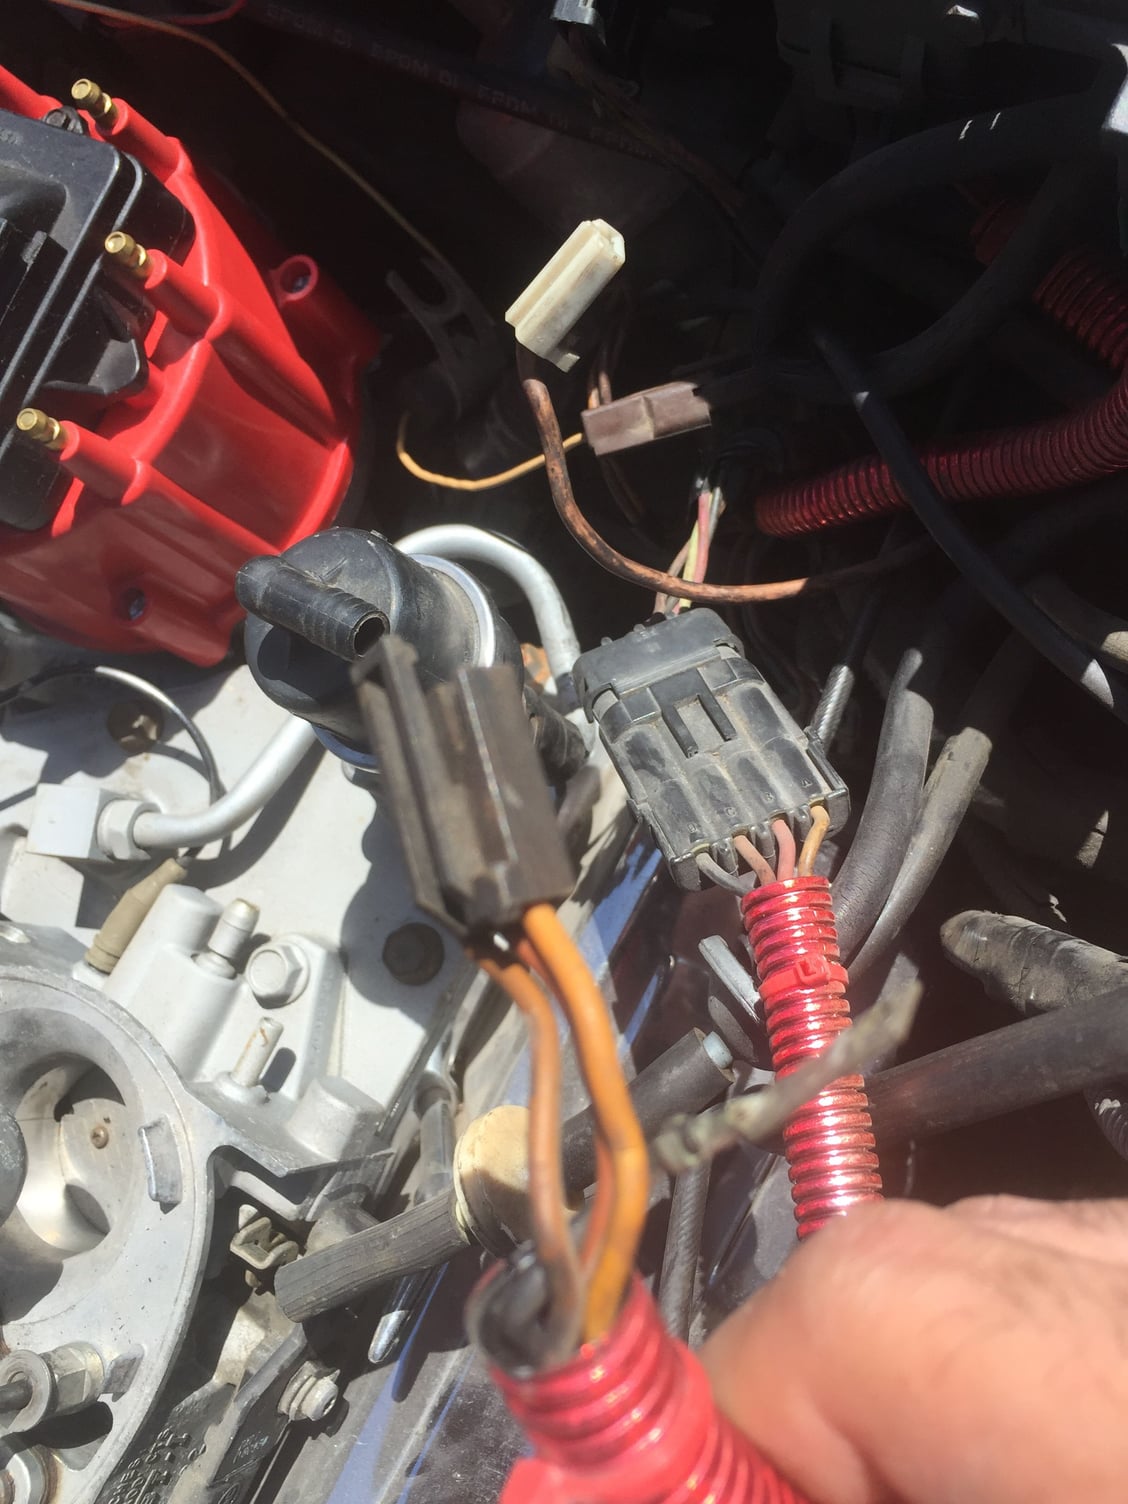 For some reason can't locate these wires in my manual! - CorvetteForum